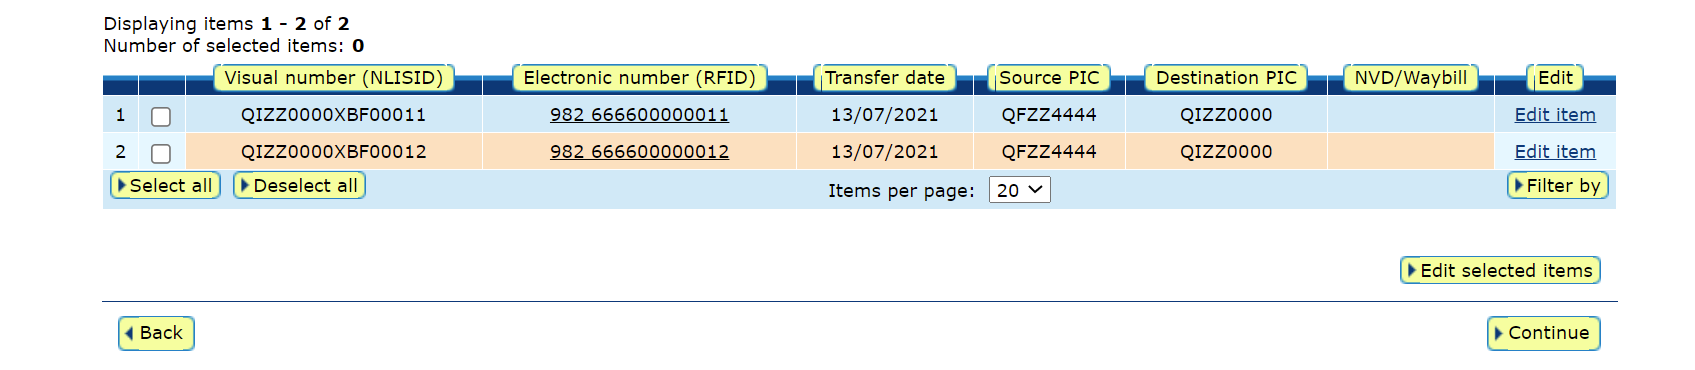 Screenshot of NLIS database showing a sample of the device row highlighted orange to indicate edits have been made